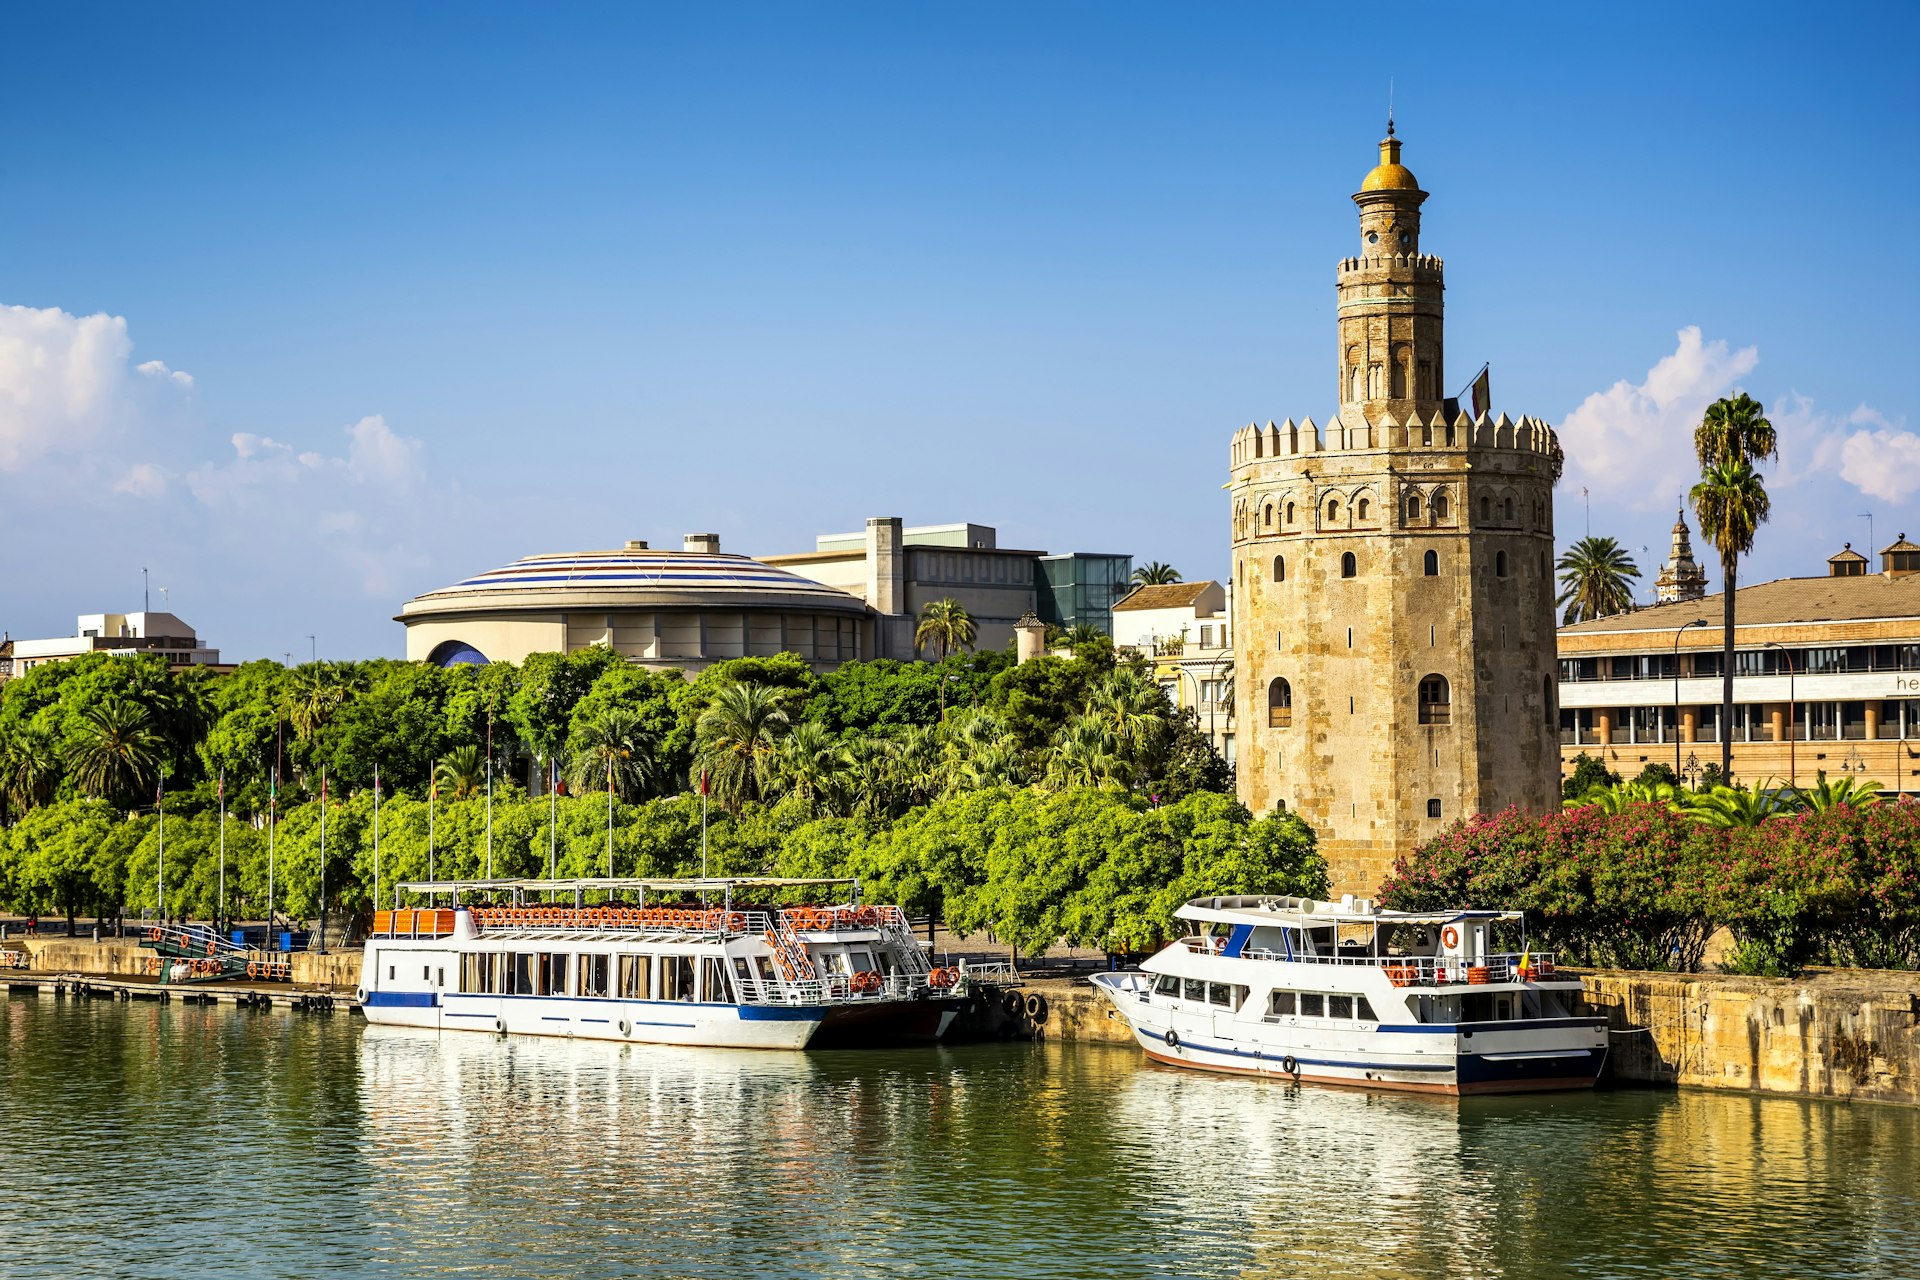 Seville's Torre del Oro, a circular stone tower with a minaret next to the river; white boats are moored in front of it and there are trees and bushes on either side of the tower.